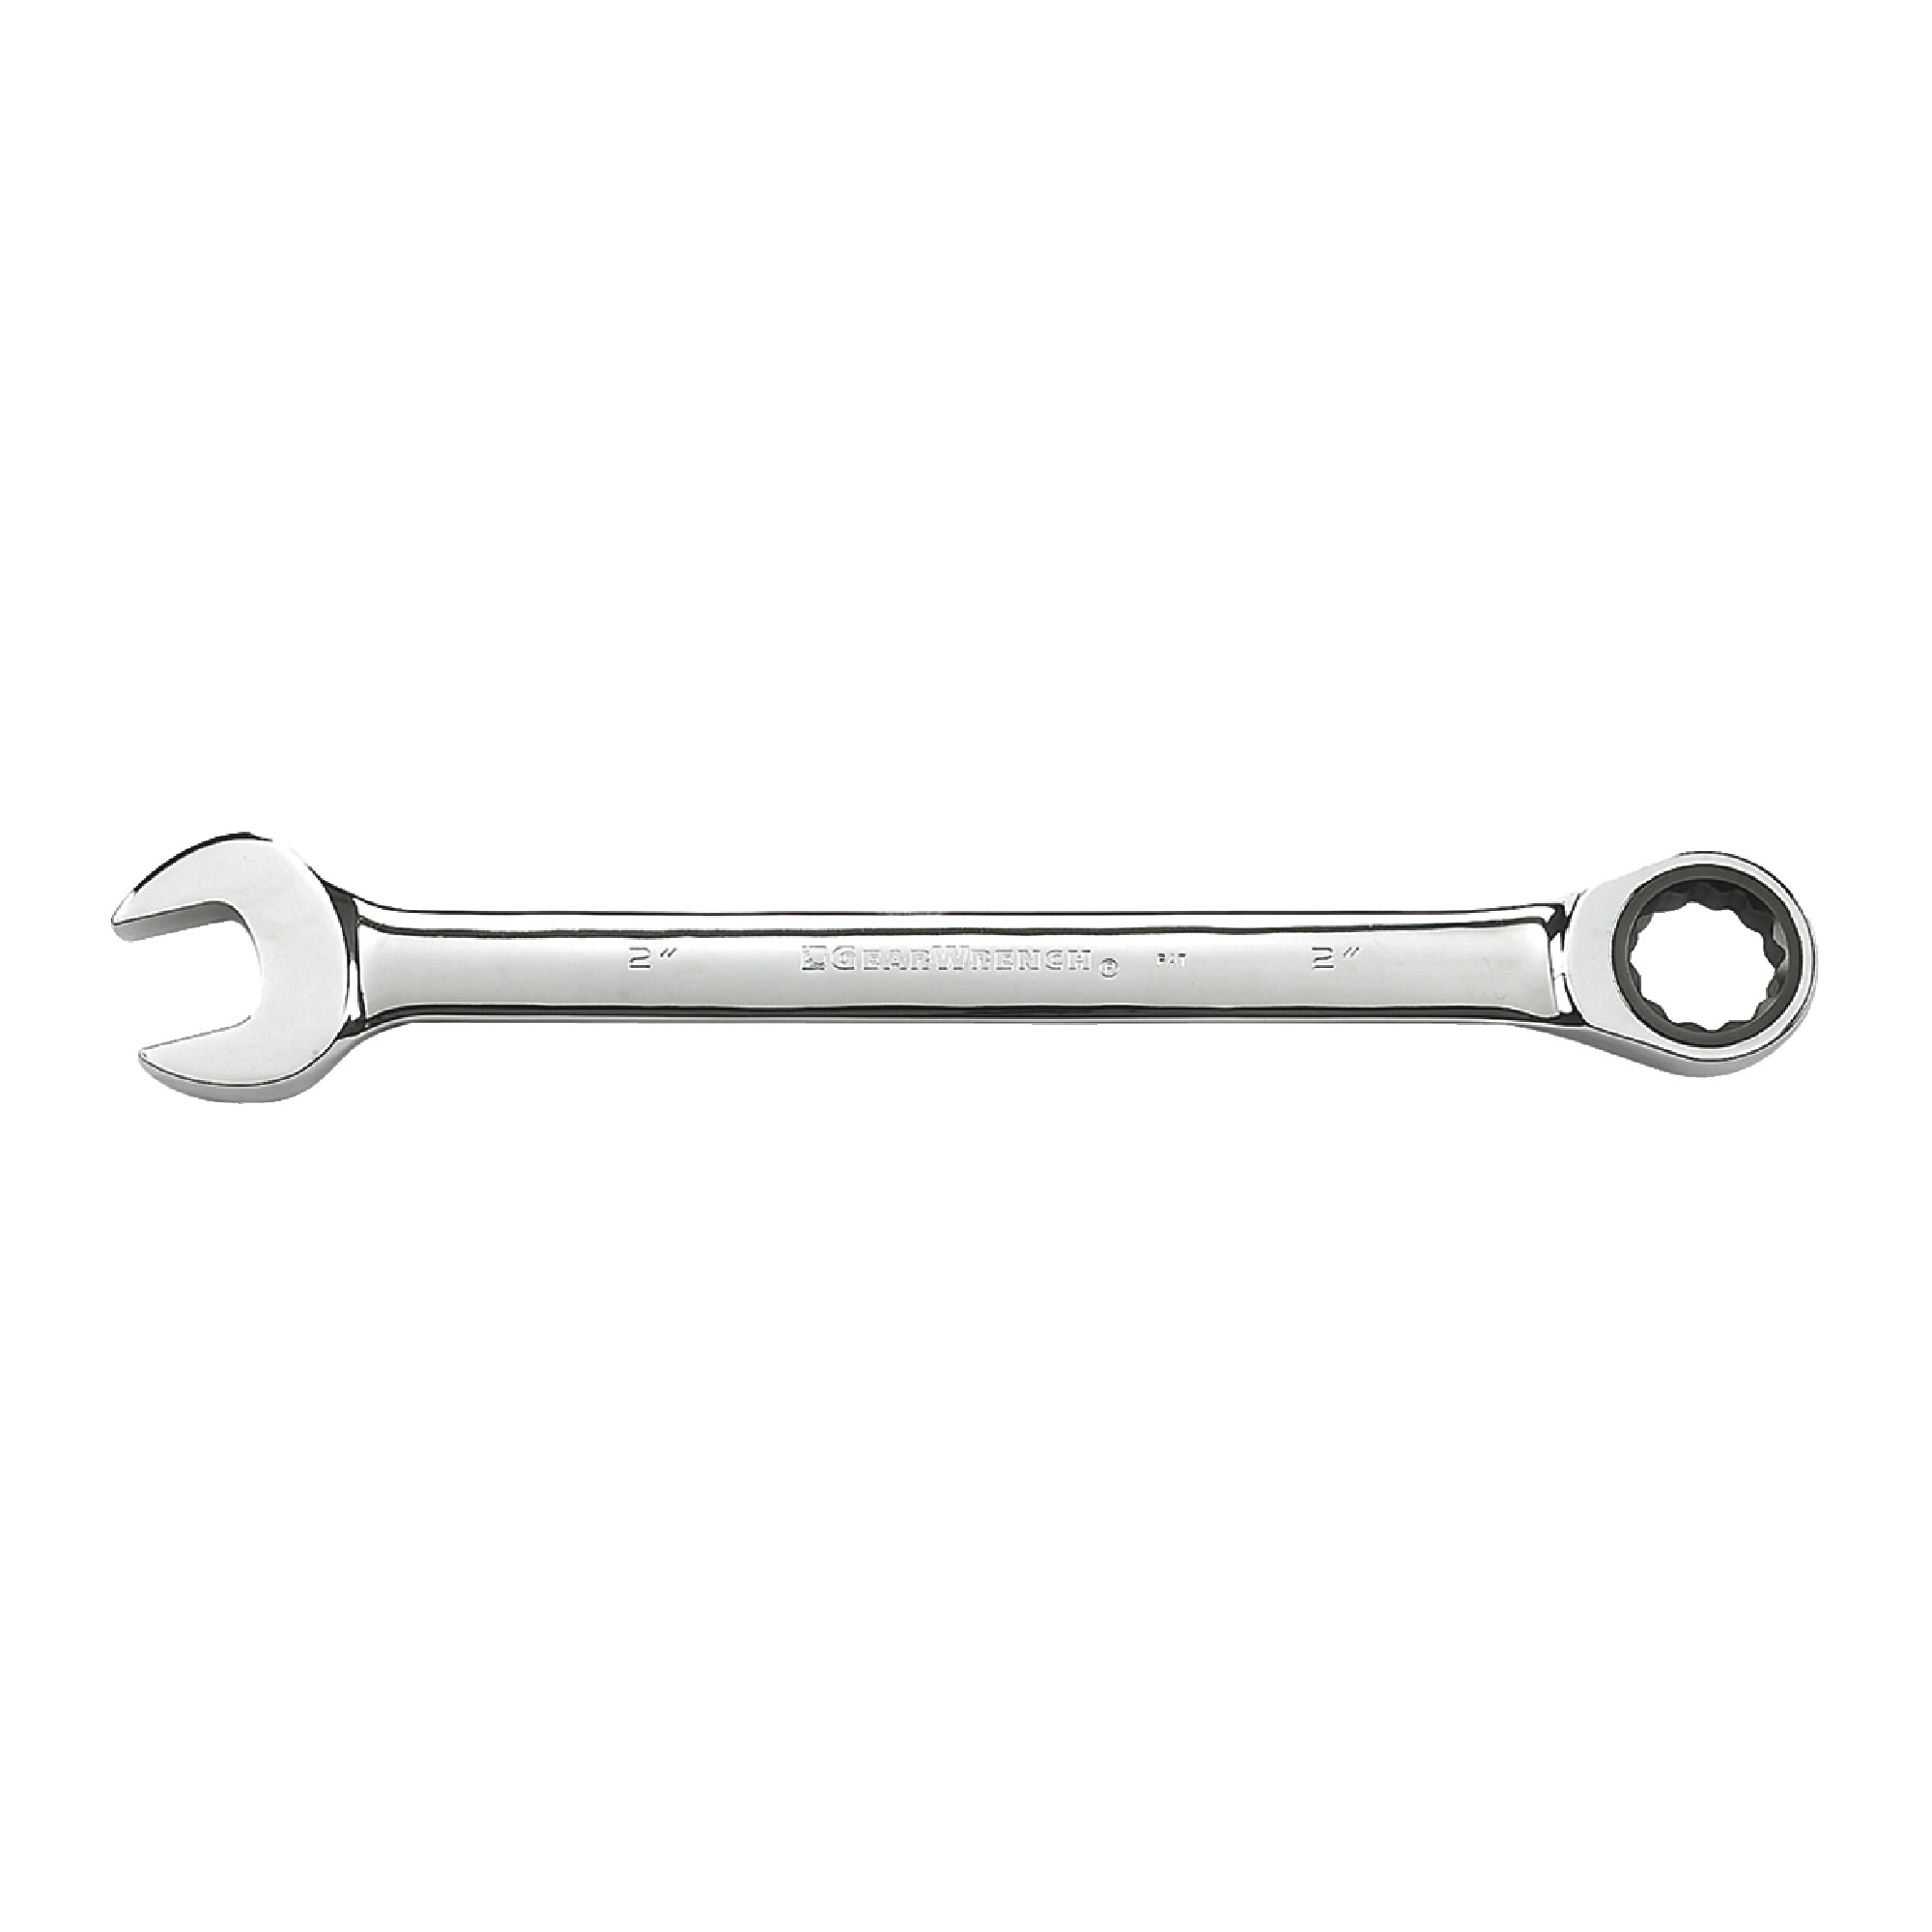 1-5/16" 12 Point Jumbo Ratcheting Combination Wrench